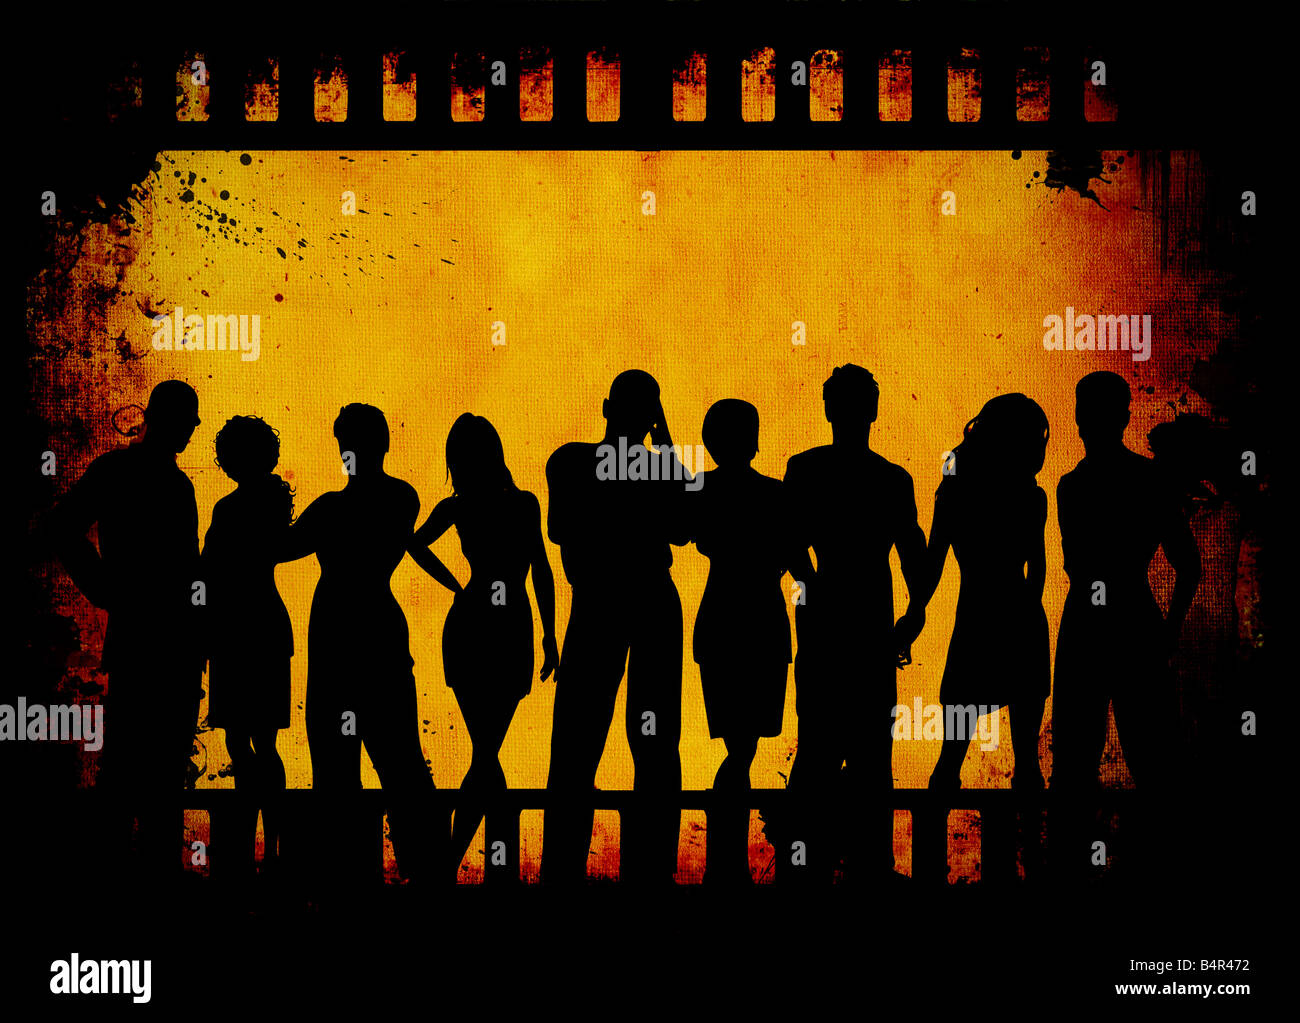 Group of young people on grunge film strip background Stock Photo